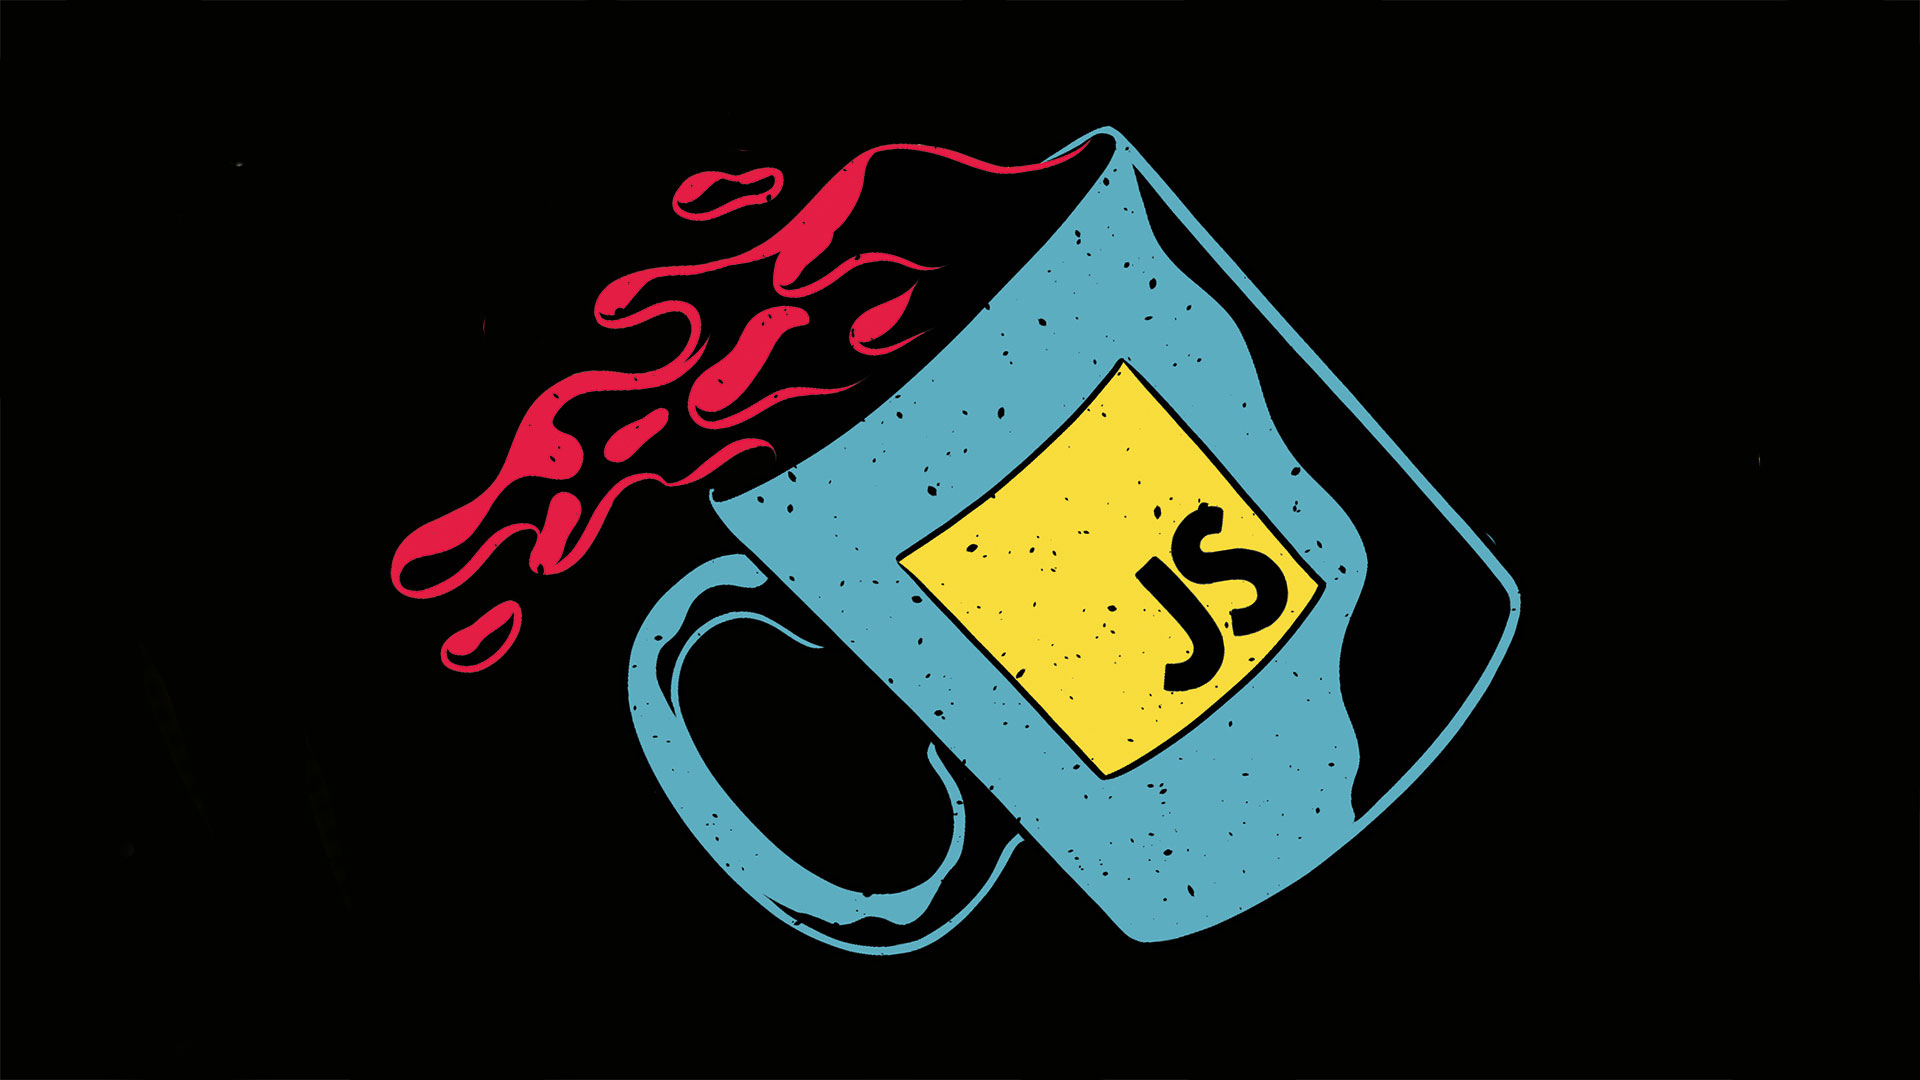 SimplyTechnologies' JS Cup Image